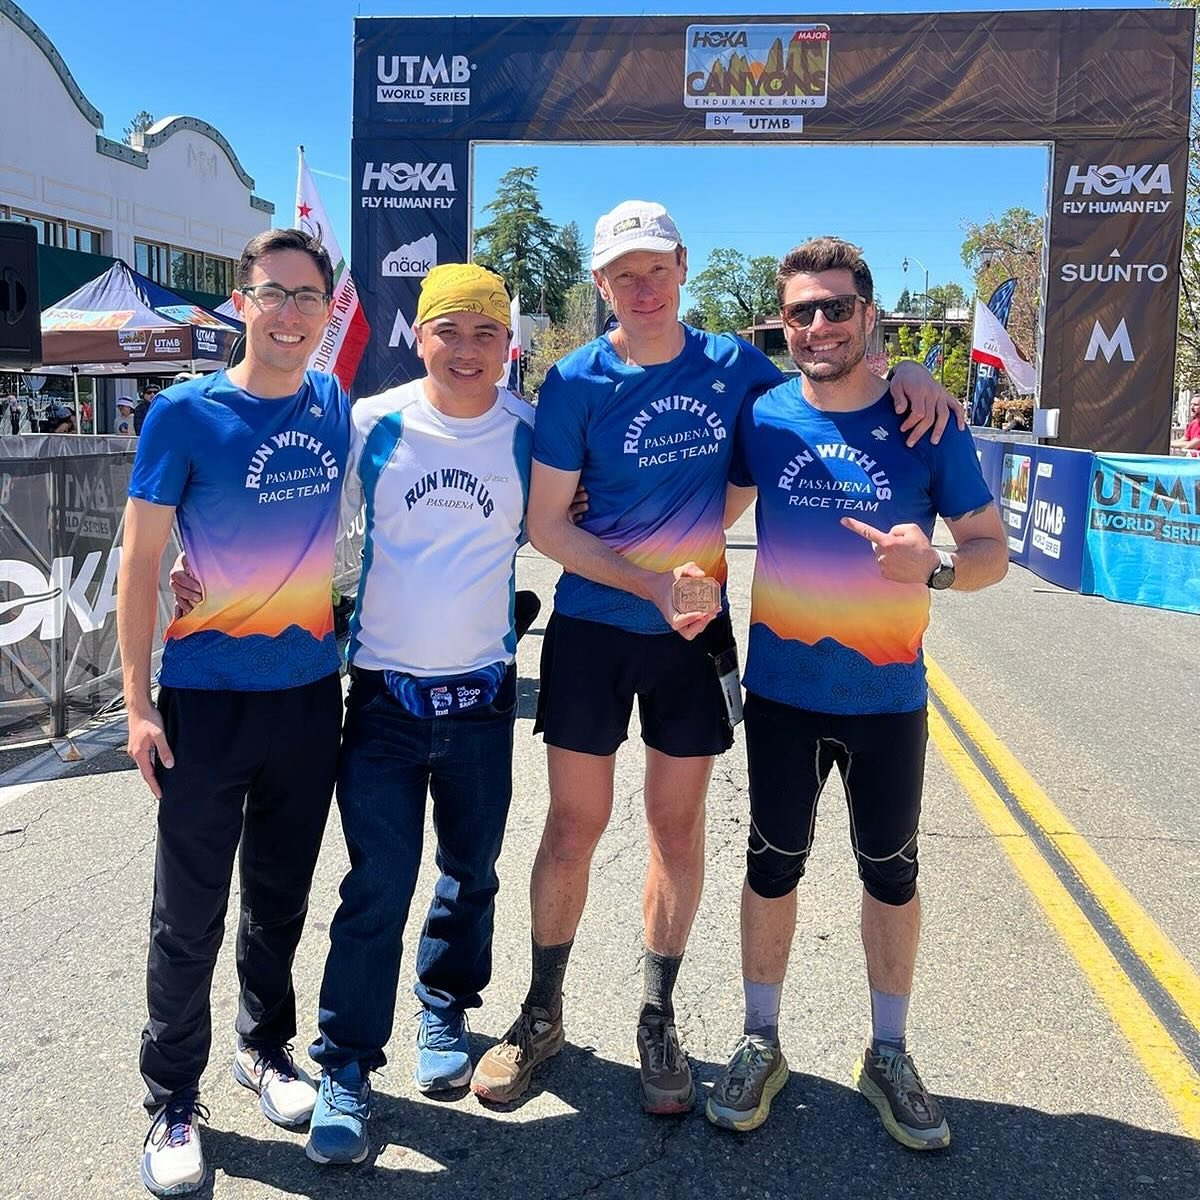 Our team had a VERY busy weekend full of amazing accomplishments!! 

On the trail side, we had a few team members participate in the @canyonsenduranceruns. 

💯  @gabrielepasadena finished the Canyons 100m with a time of 25:58:58!! Huge shout out to 